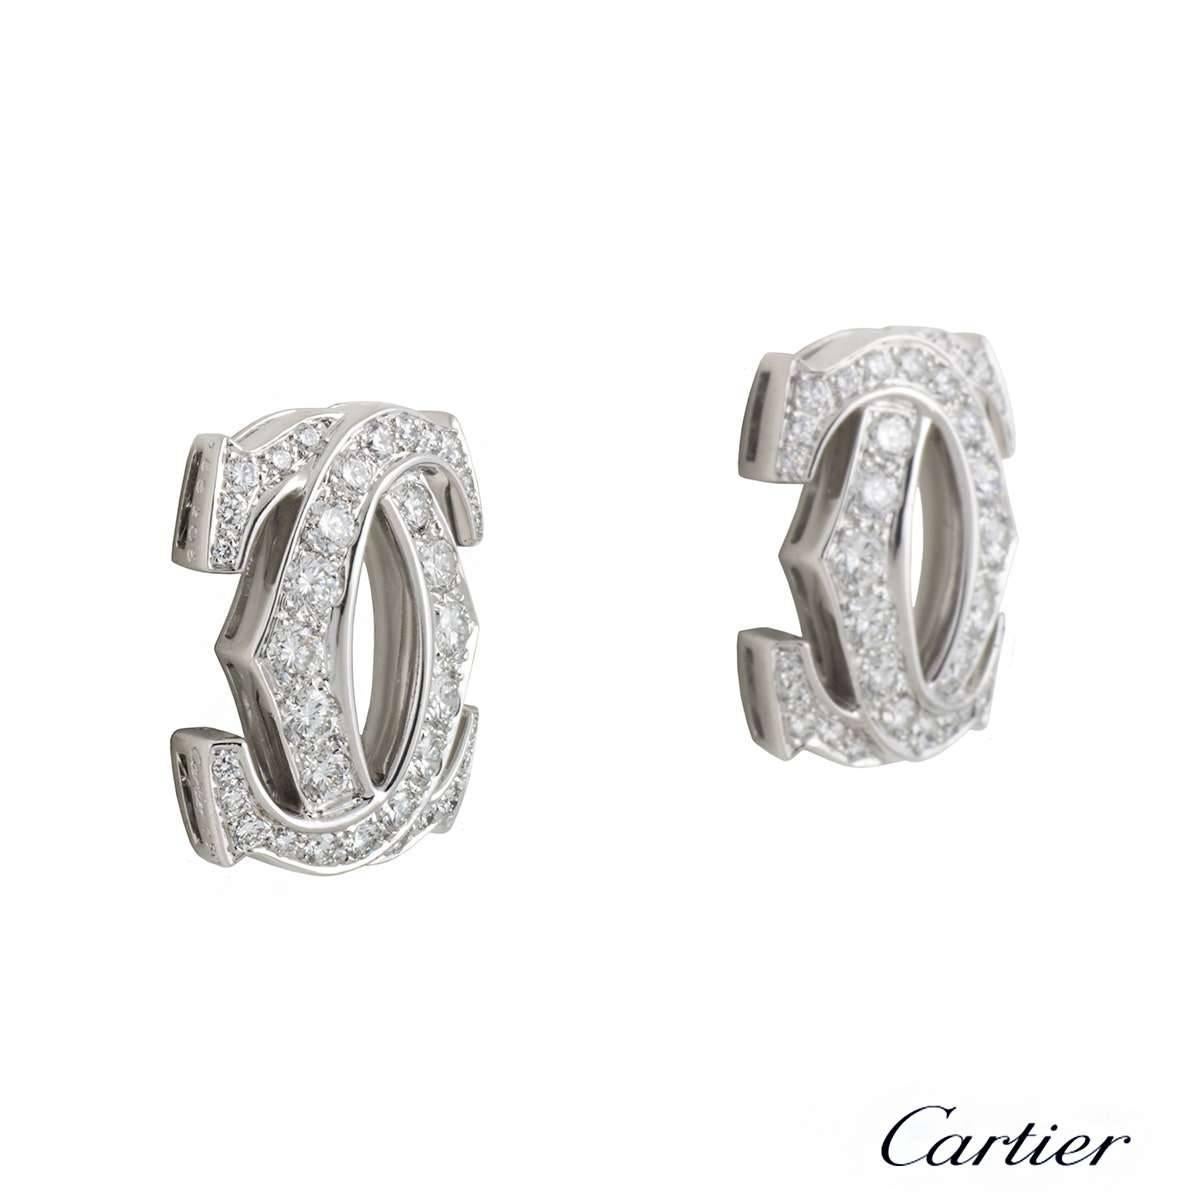 A pair of 18k white gold Cartier earrings from the C de Cartier collection. Each earring is composed of the iconic C de Cartier, interweaving C motifs with 34 graduated round brilliant cut diamonds with a total of approximately 2.02ct, G colour and